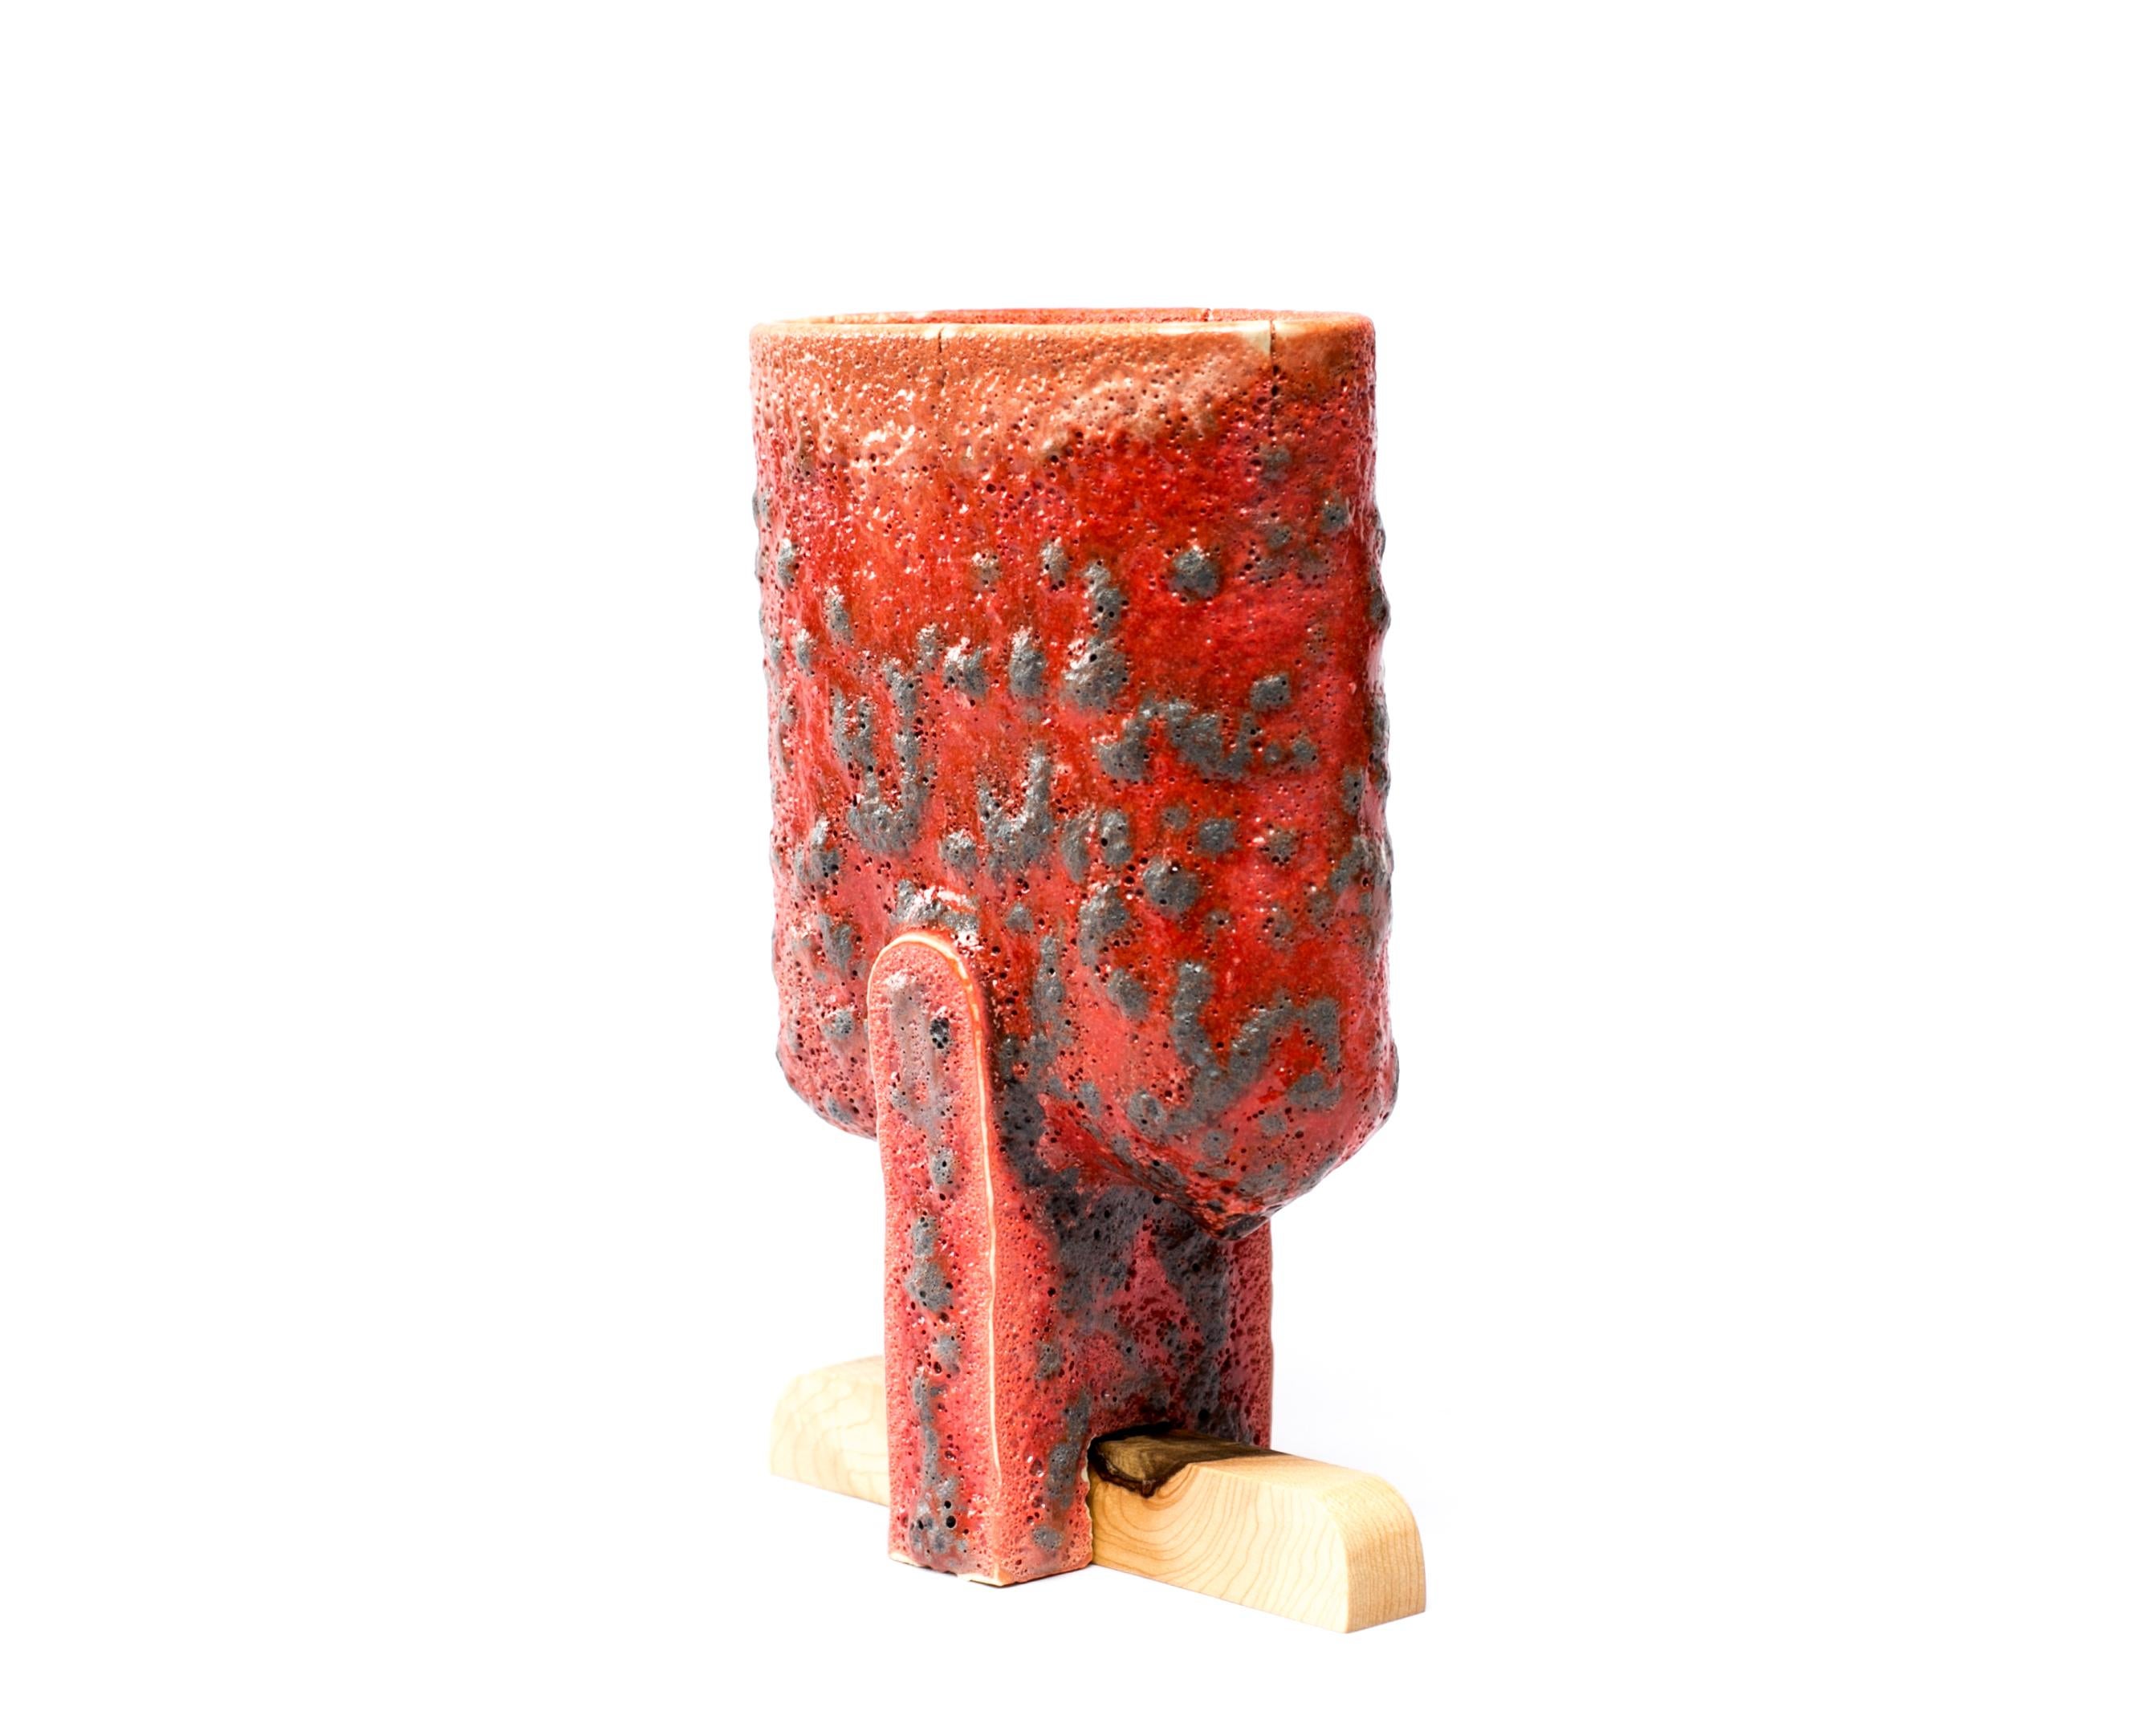 AARON PORITZ

Trophies
Ceramic and glaze, 2018
Small, without wood: approx. 6